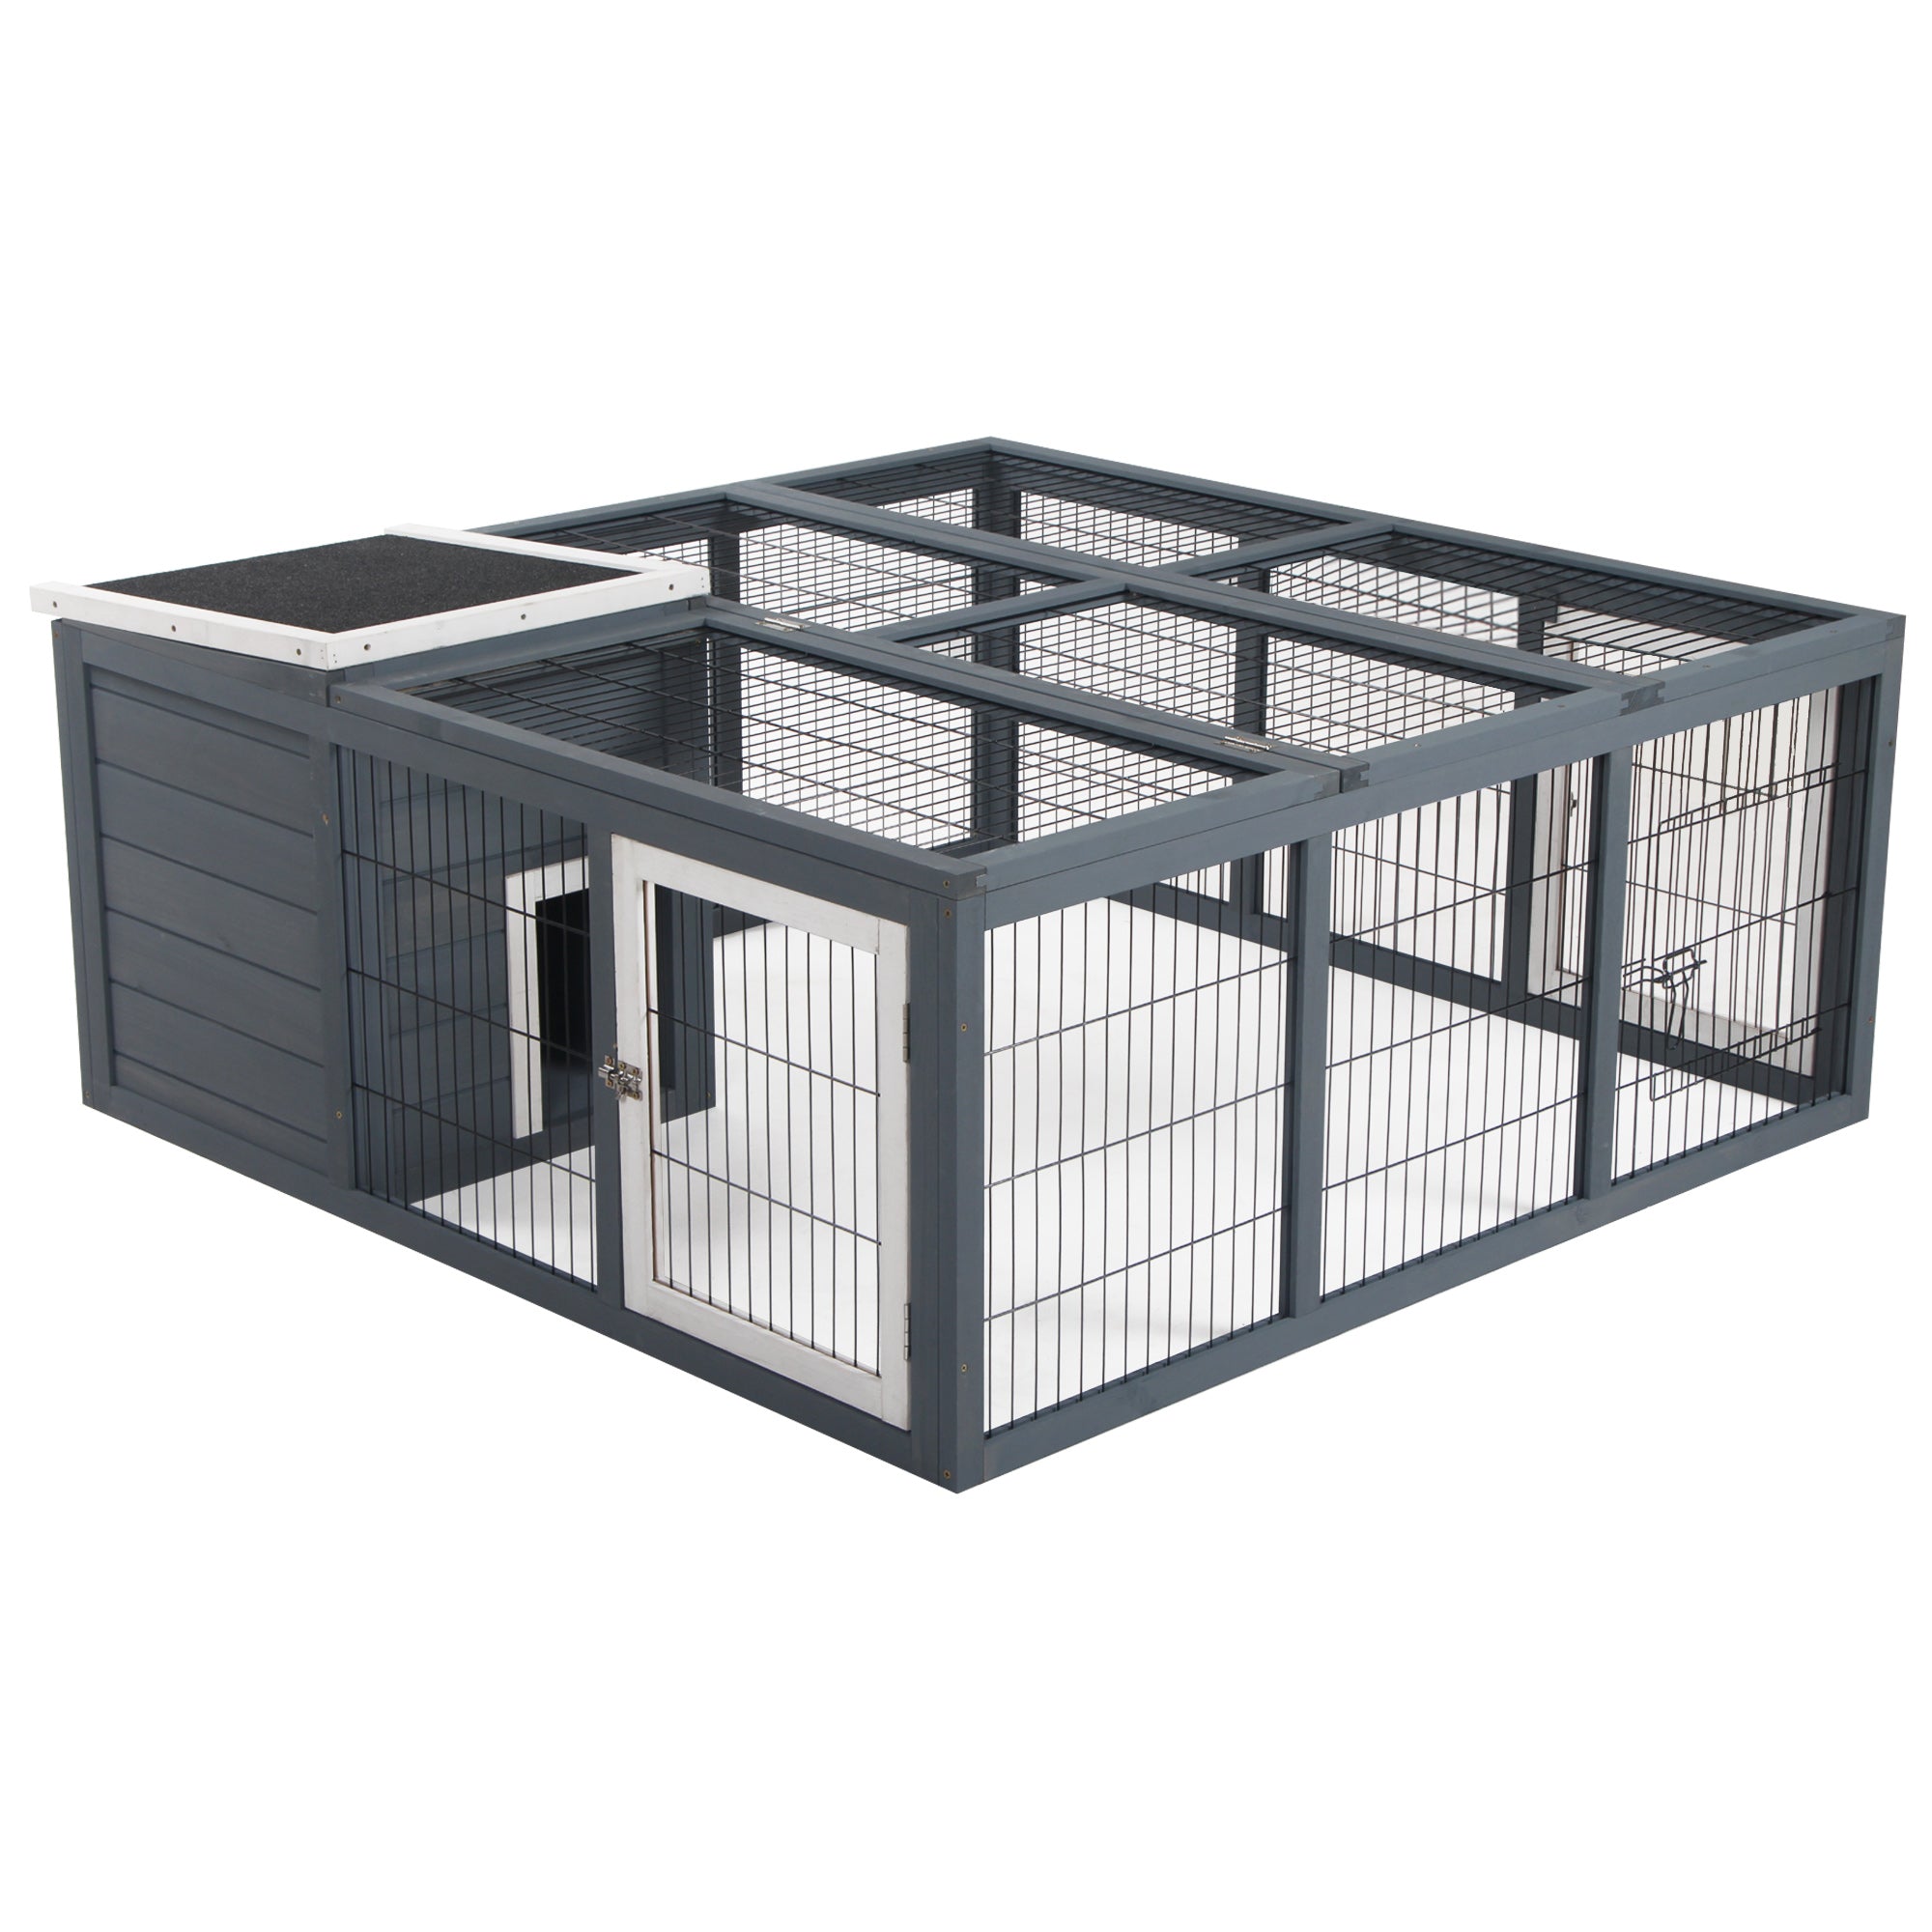 Rabbit Hutch Small Animal Guinea Pig House with Openable Main House & Run Roof, PawHut,